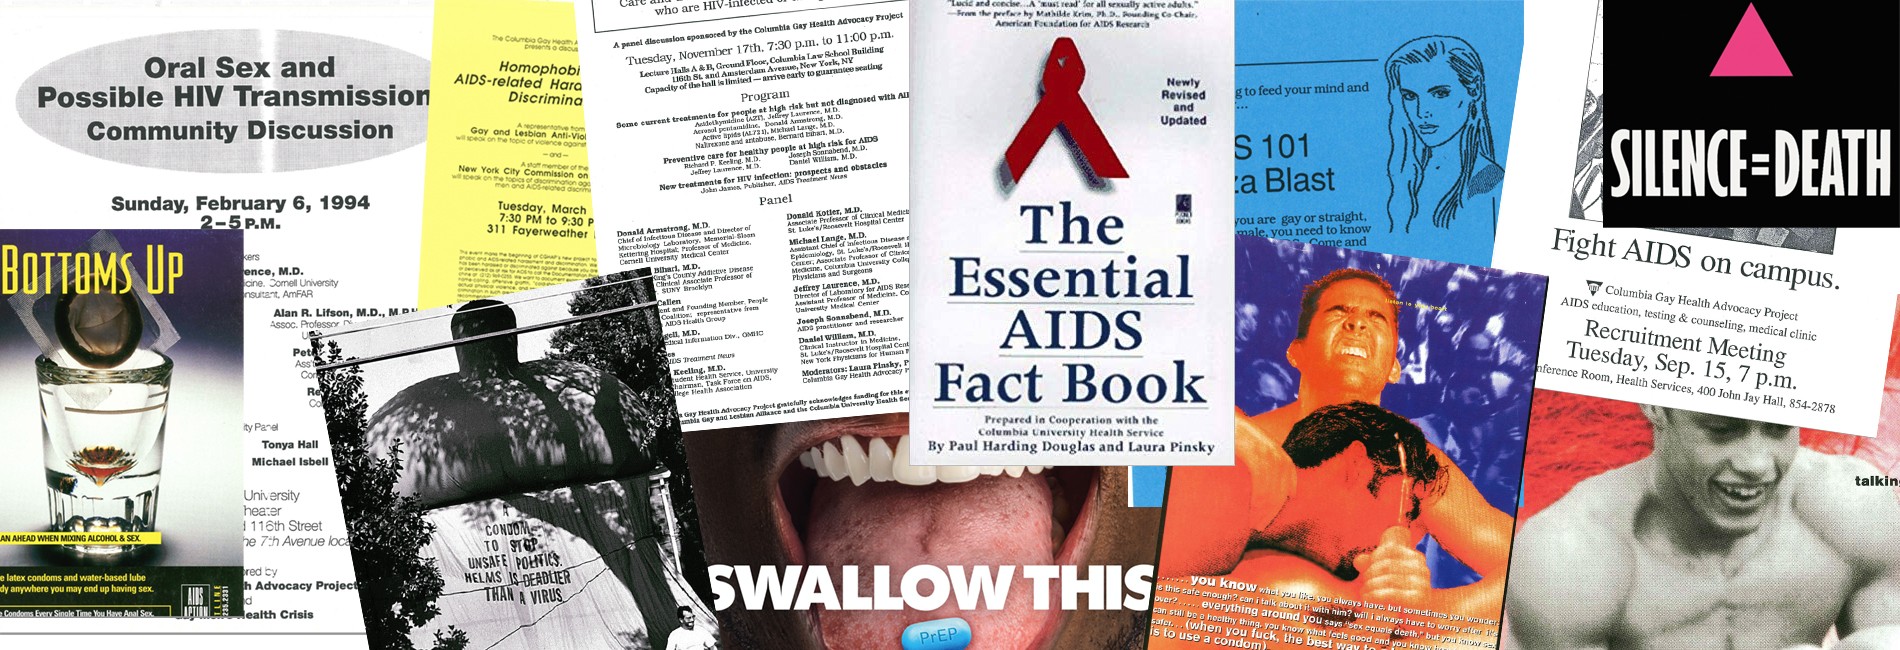 collage of posters and advertisements for HIV/AIDS awareness and education